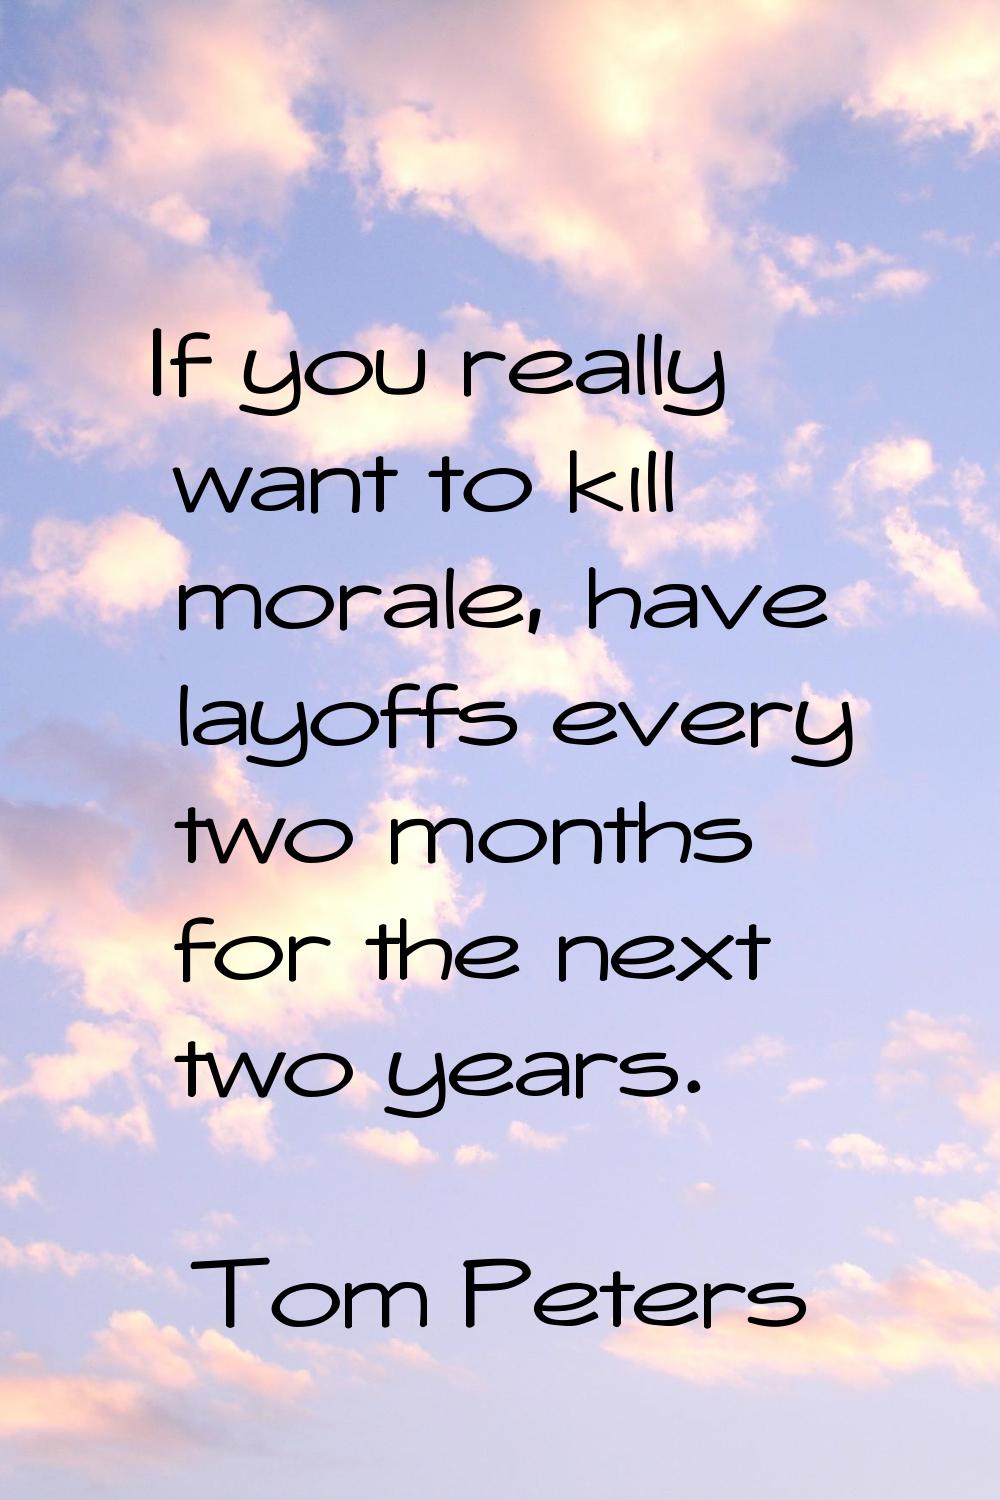 If you really want to kill morale, have layoffs every two months for the next two years.